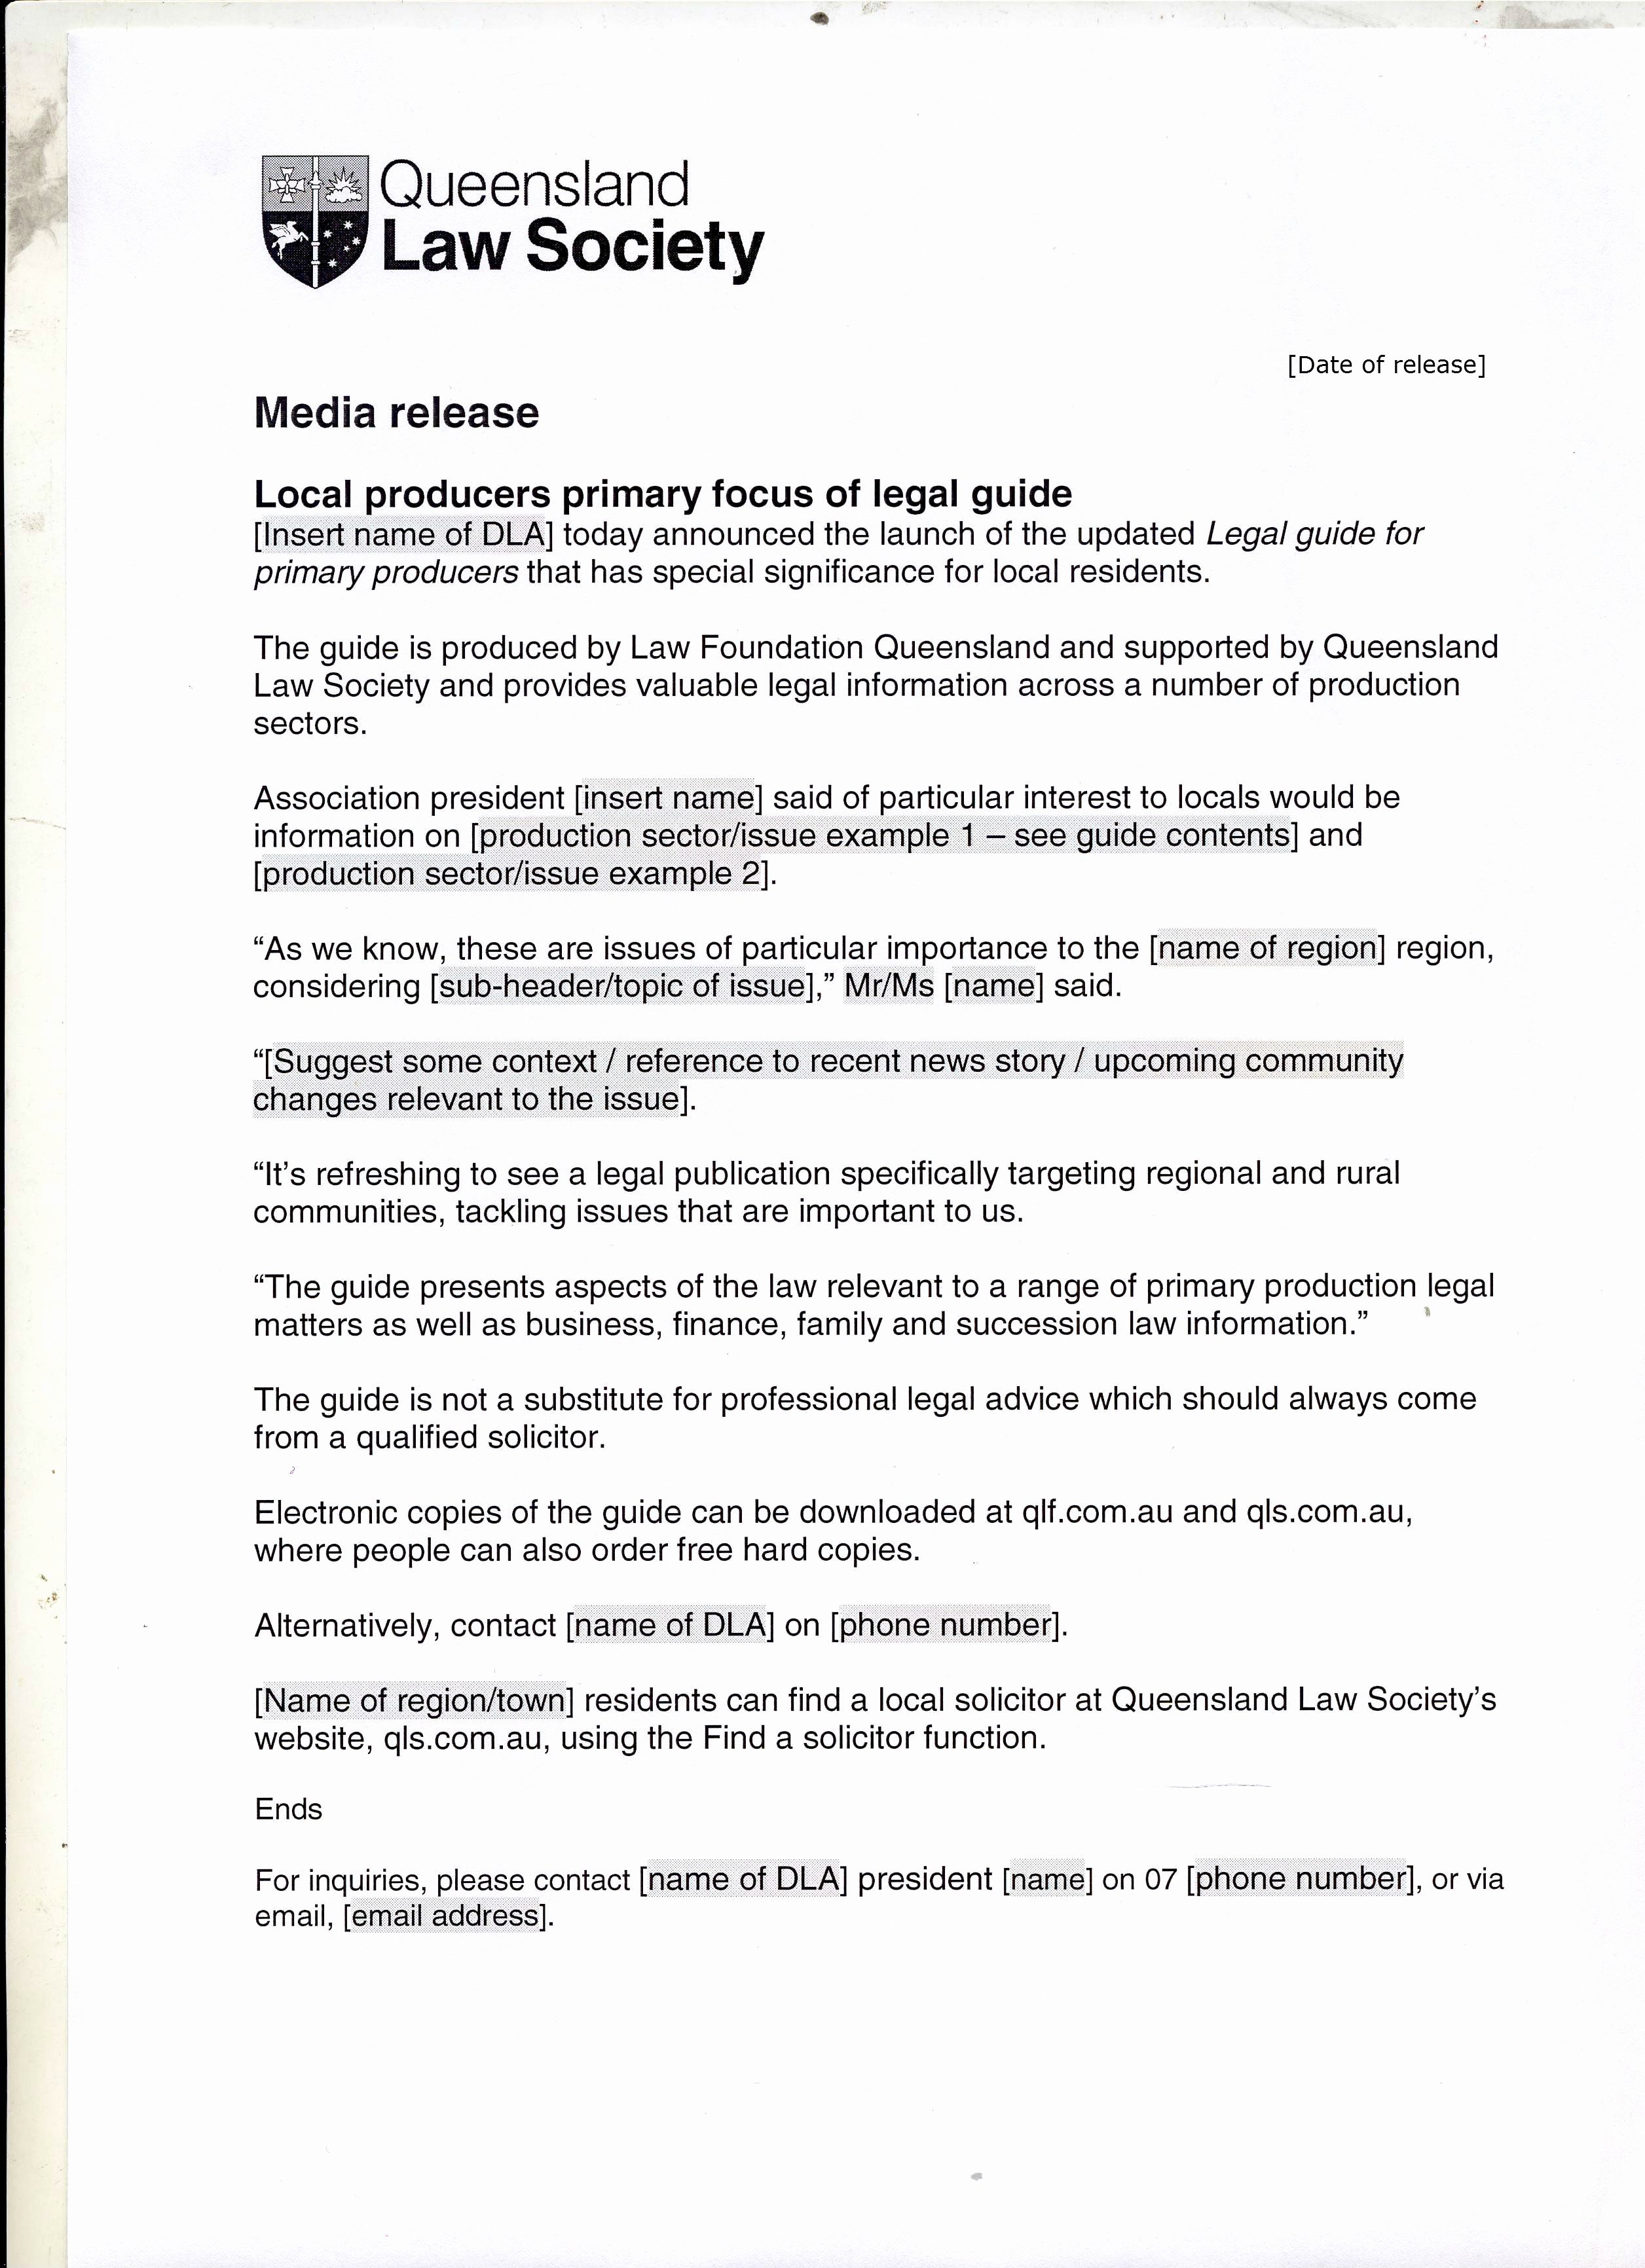 Media Release form Template Elegant Media Release Template Local Producers Primary Focus Of Legal Guide